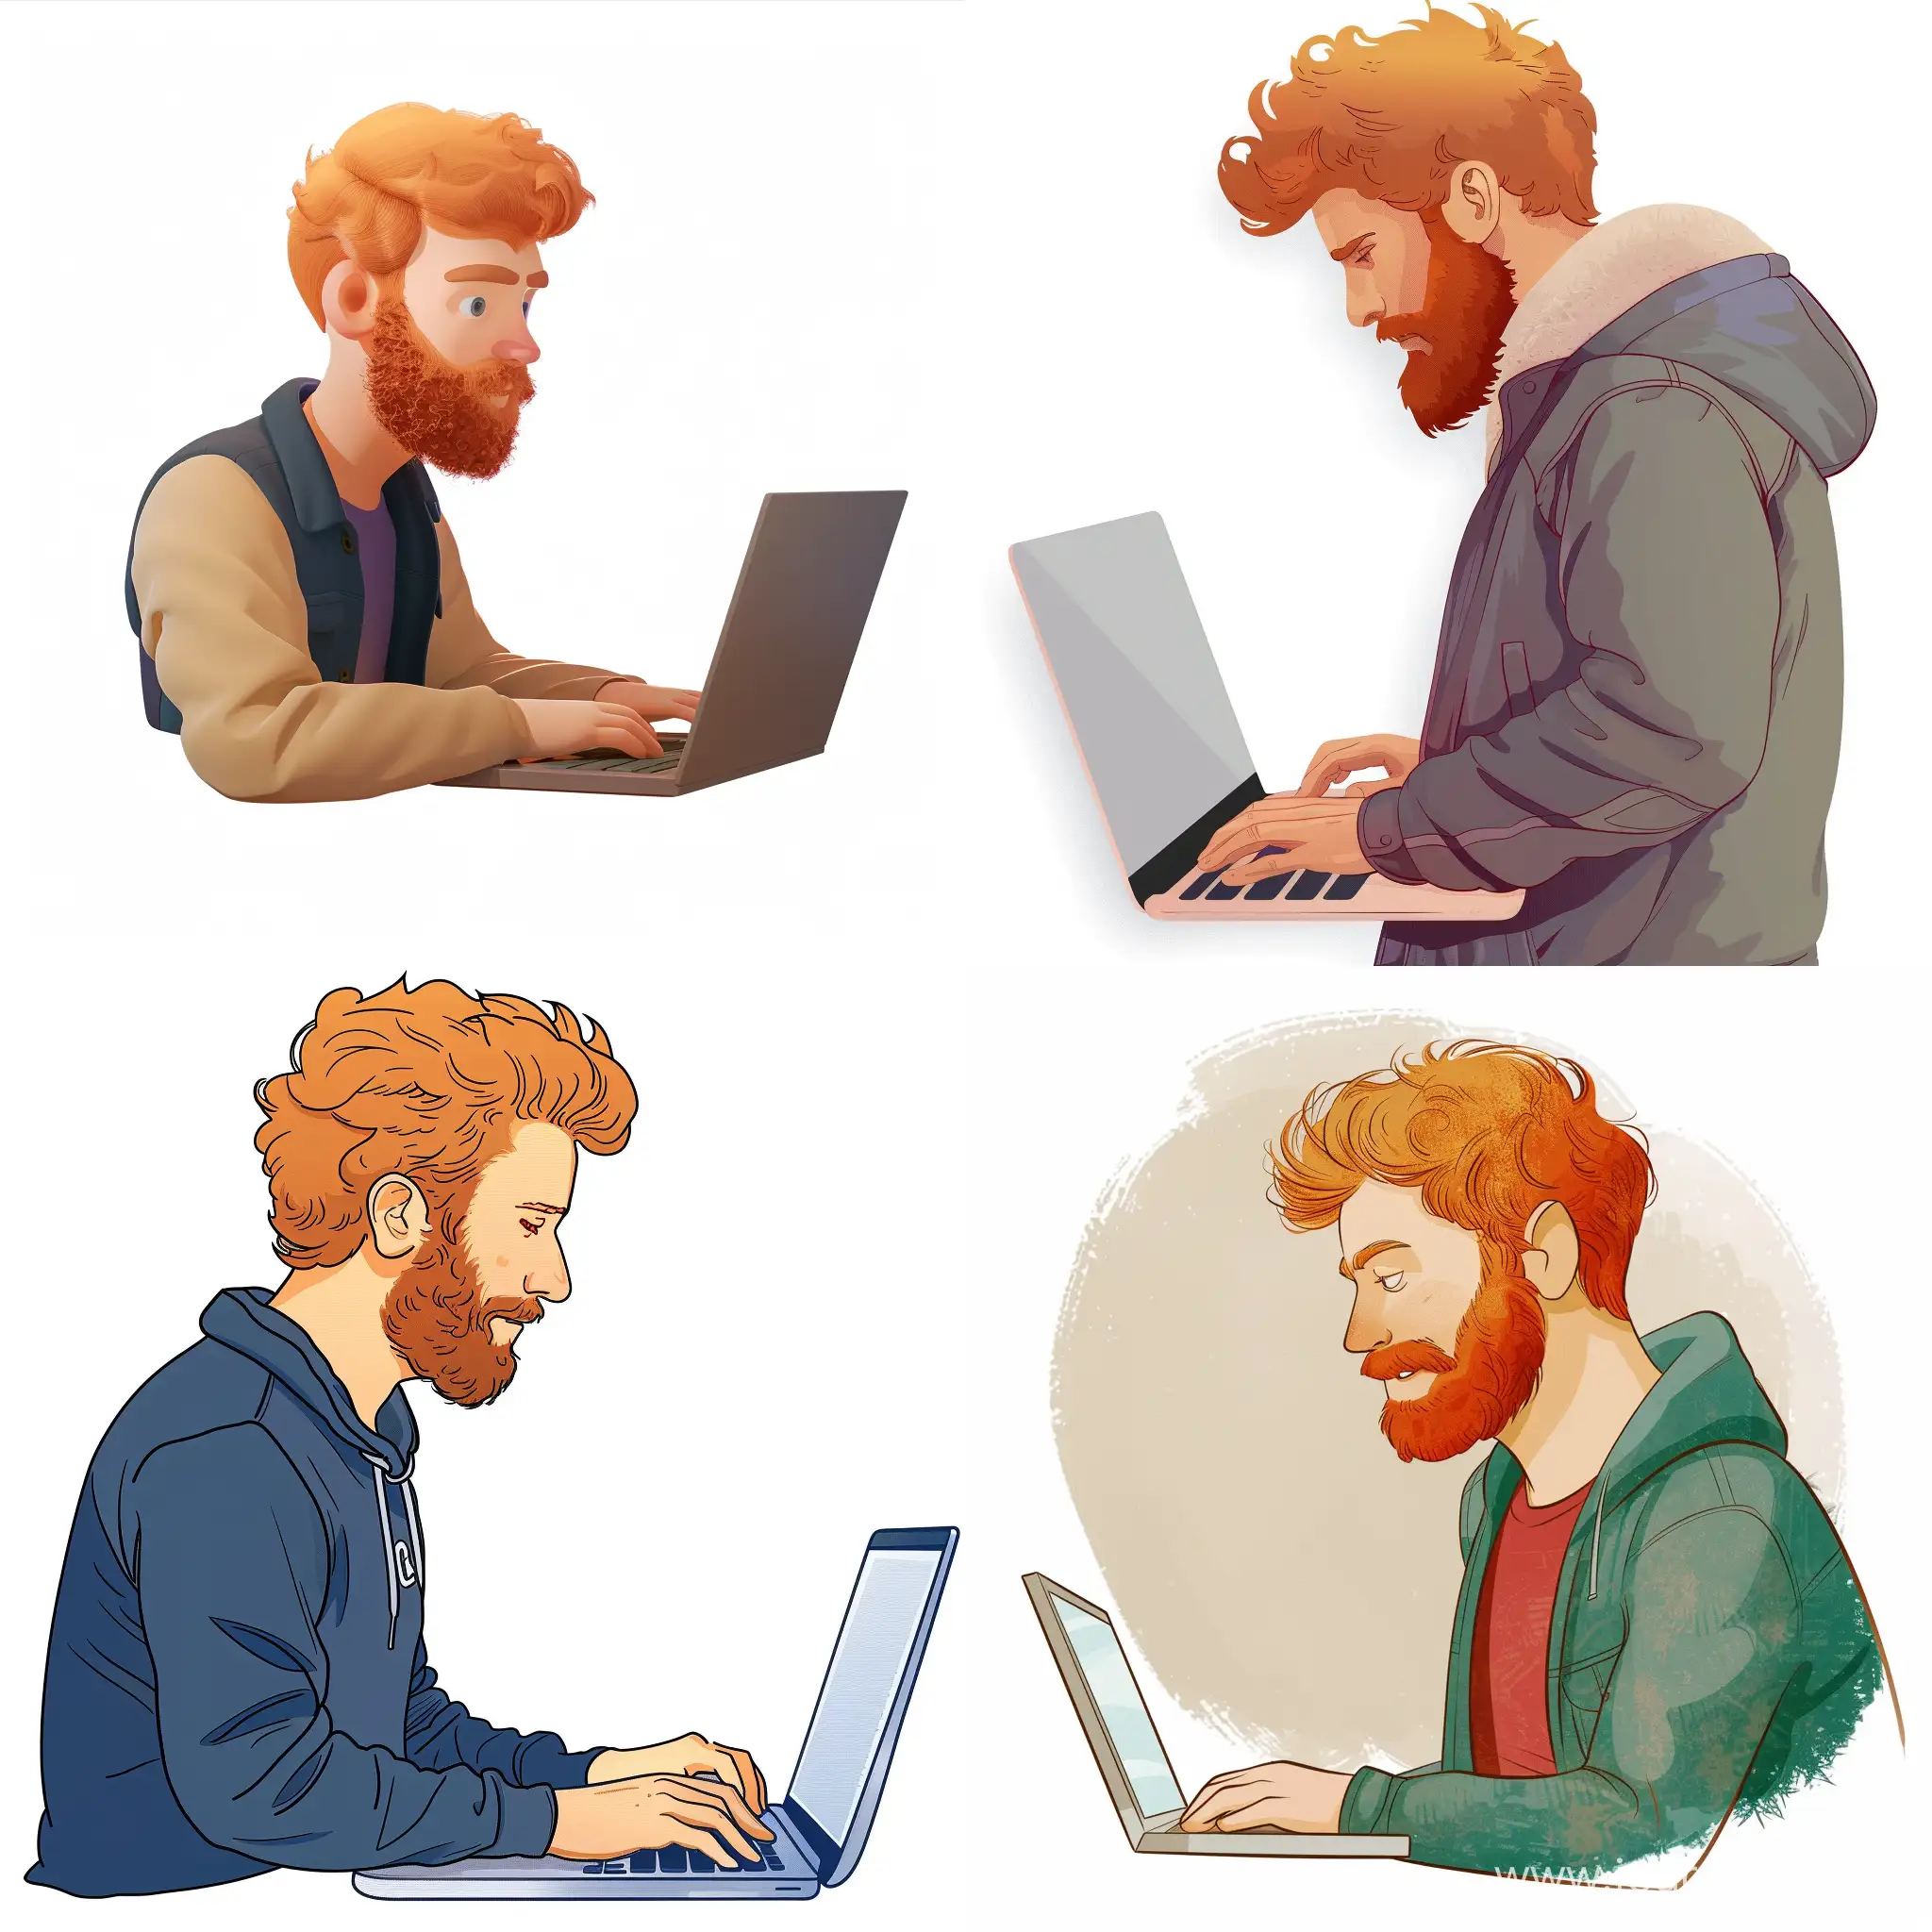 memoji of a 25 year old man with ginger hair and beardcoding in a laptop looking cool from the side